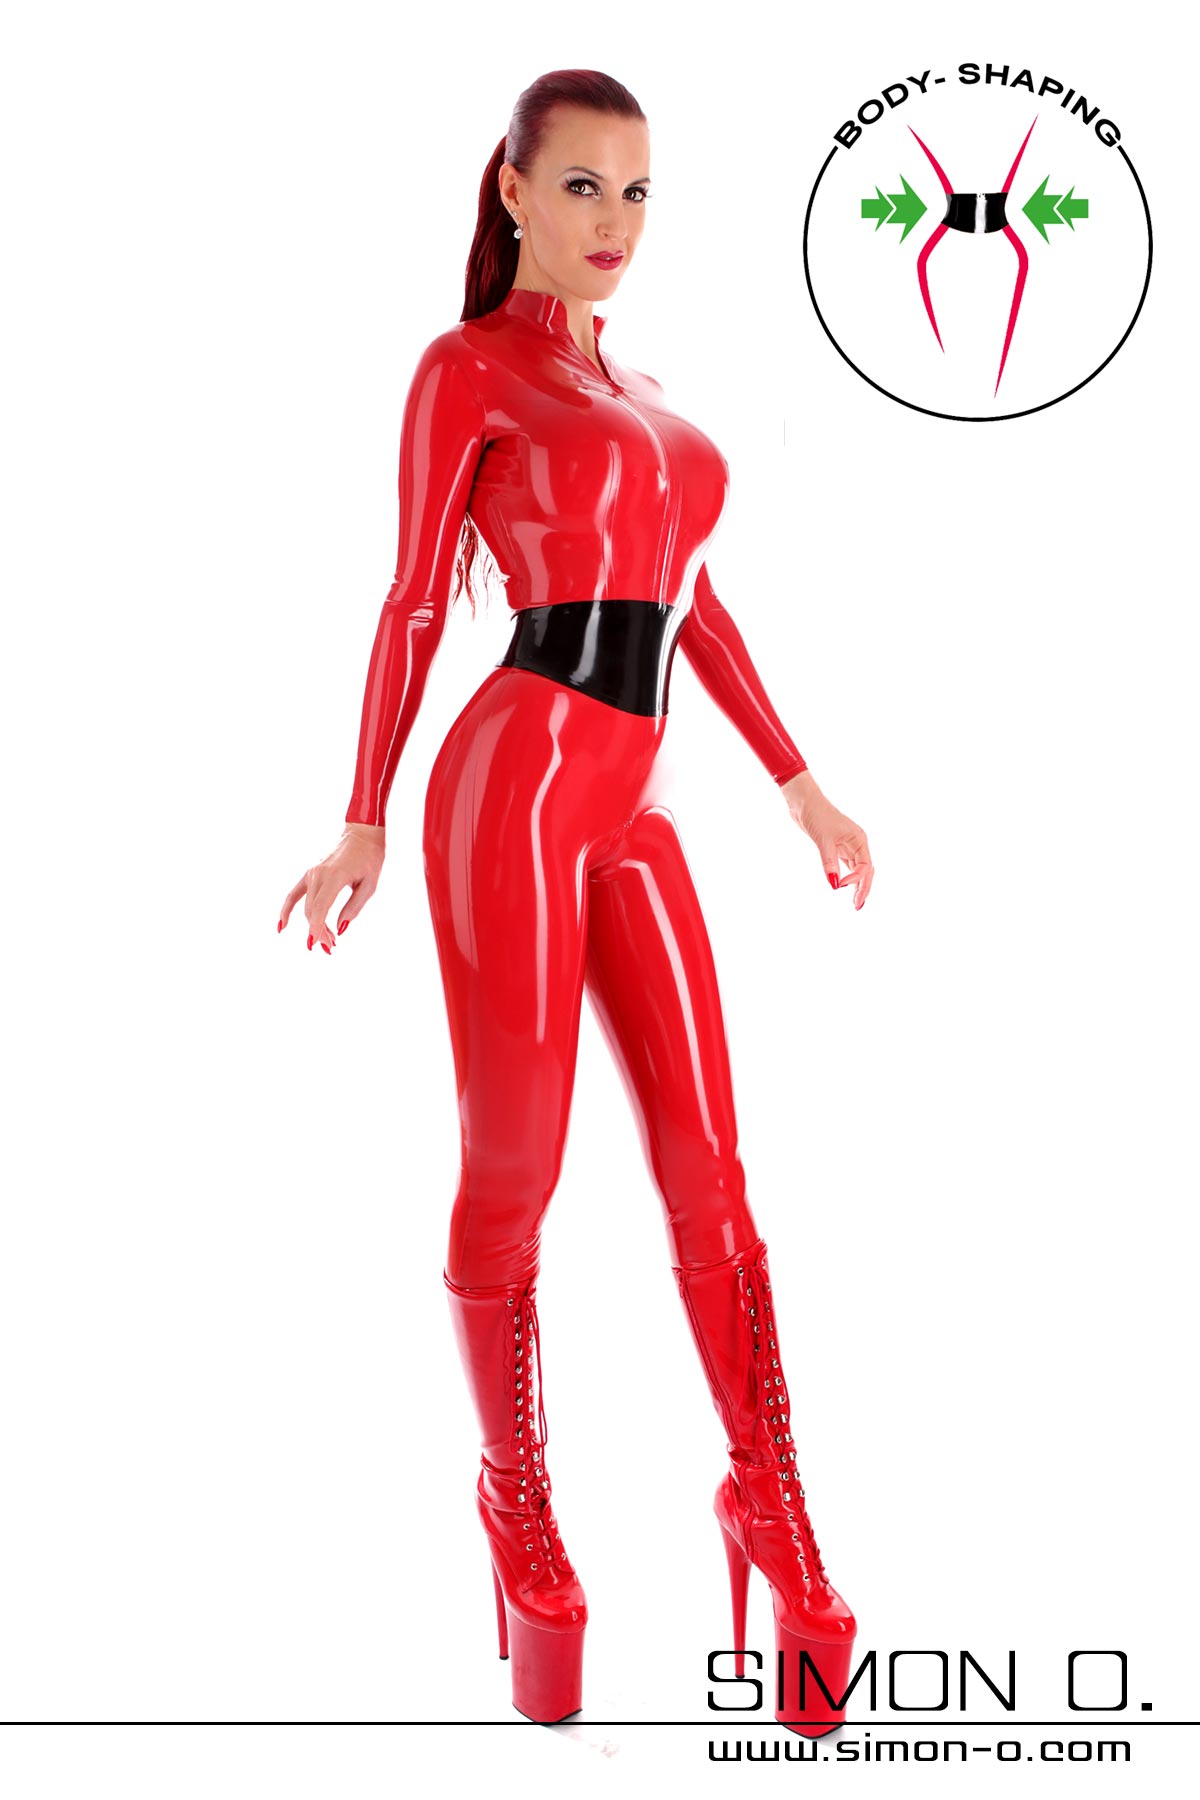 Skin tight red latex catsuit with zipper in the crotch and black bodice seen from behind